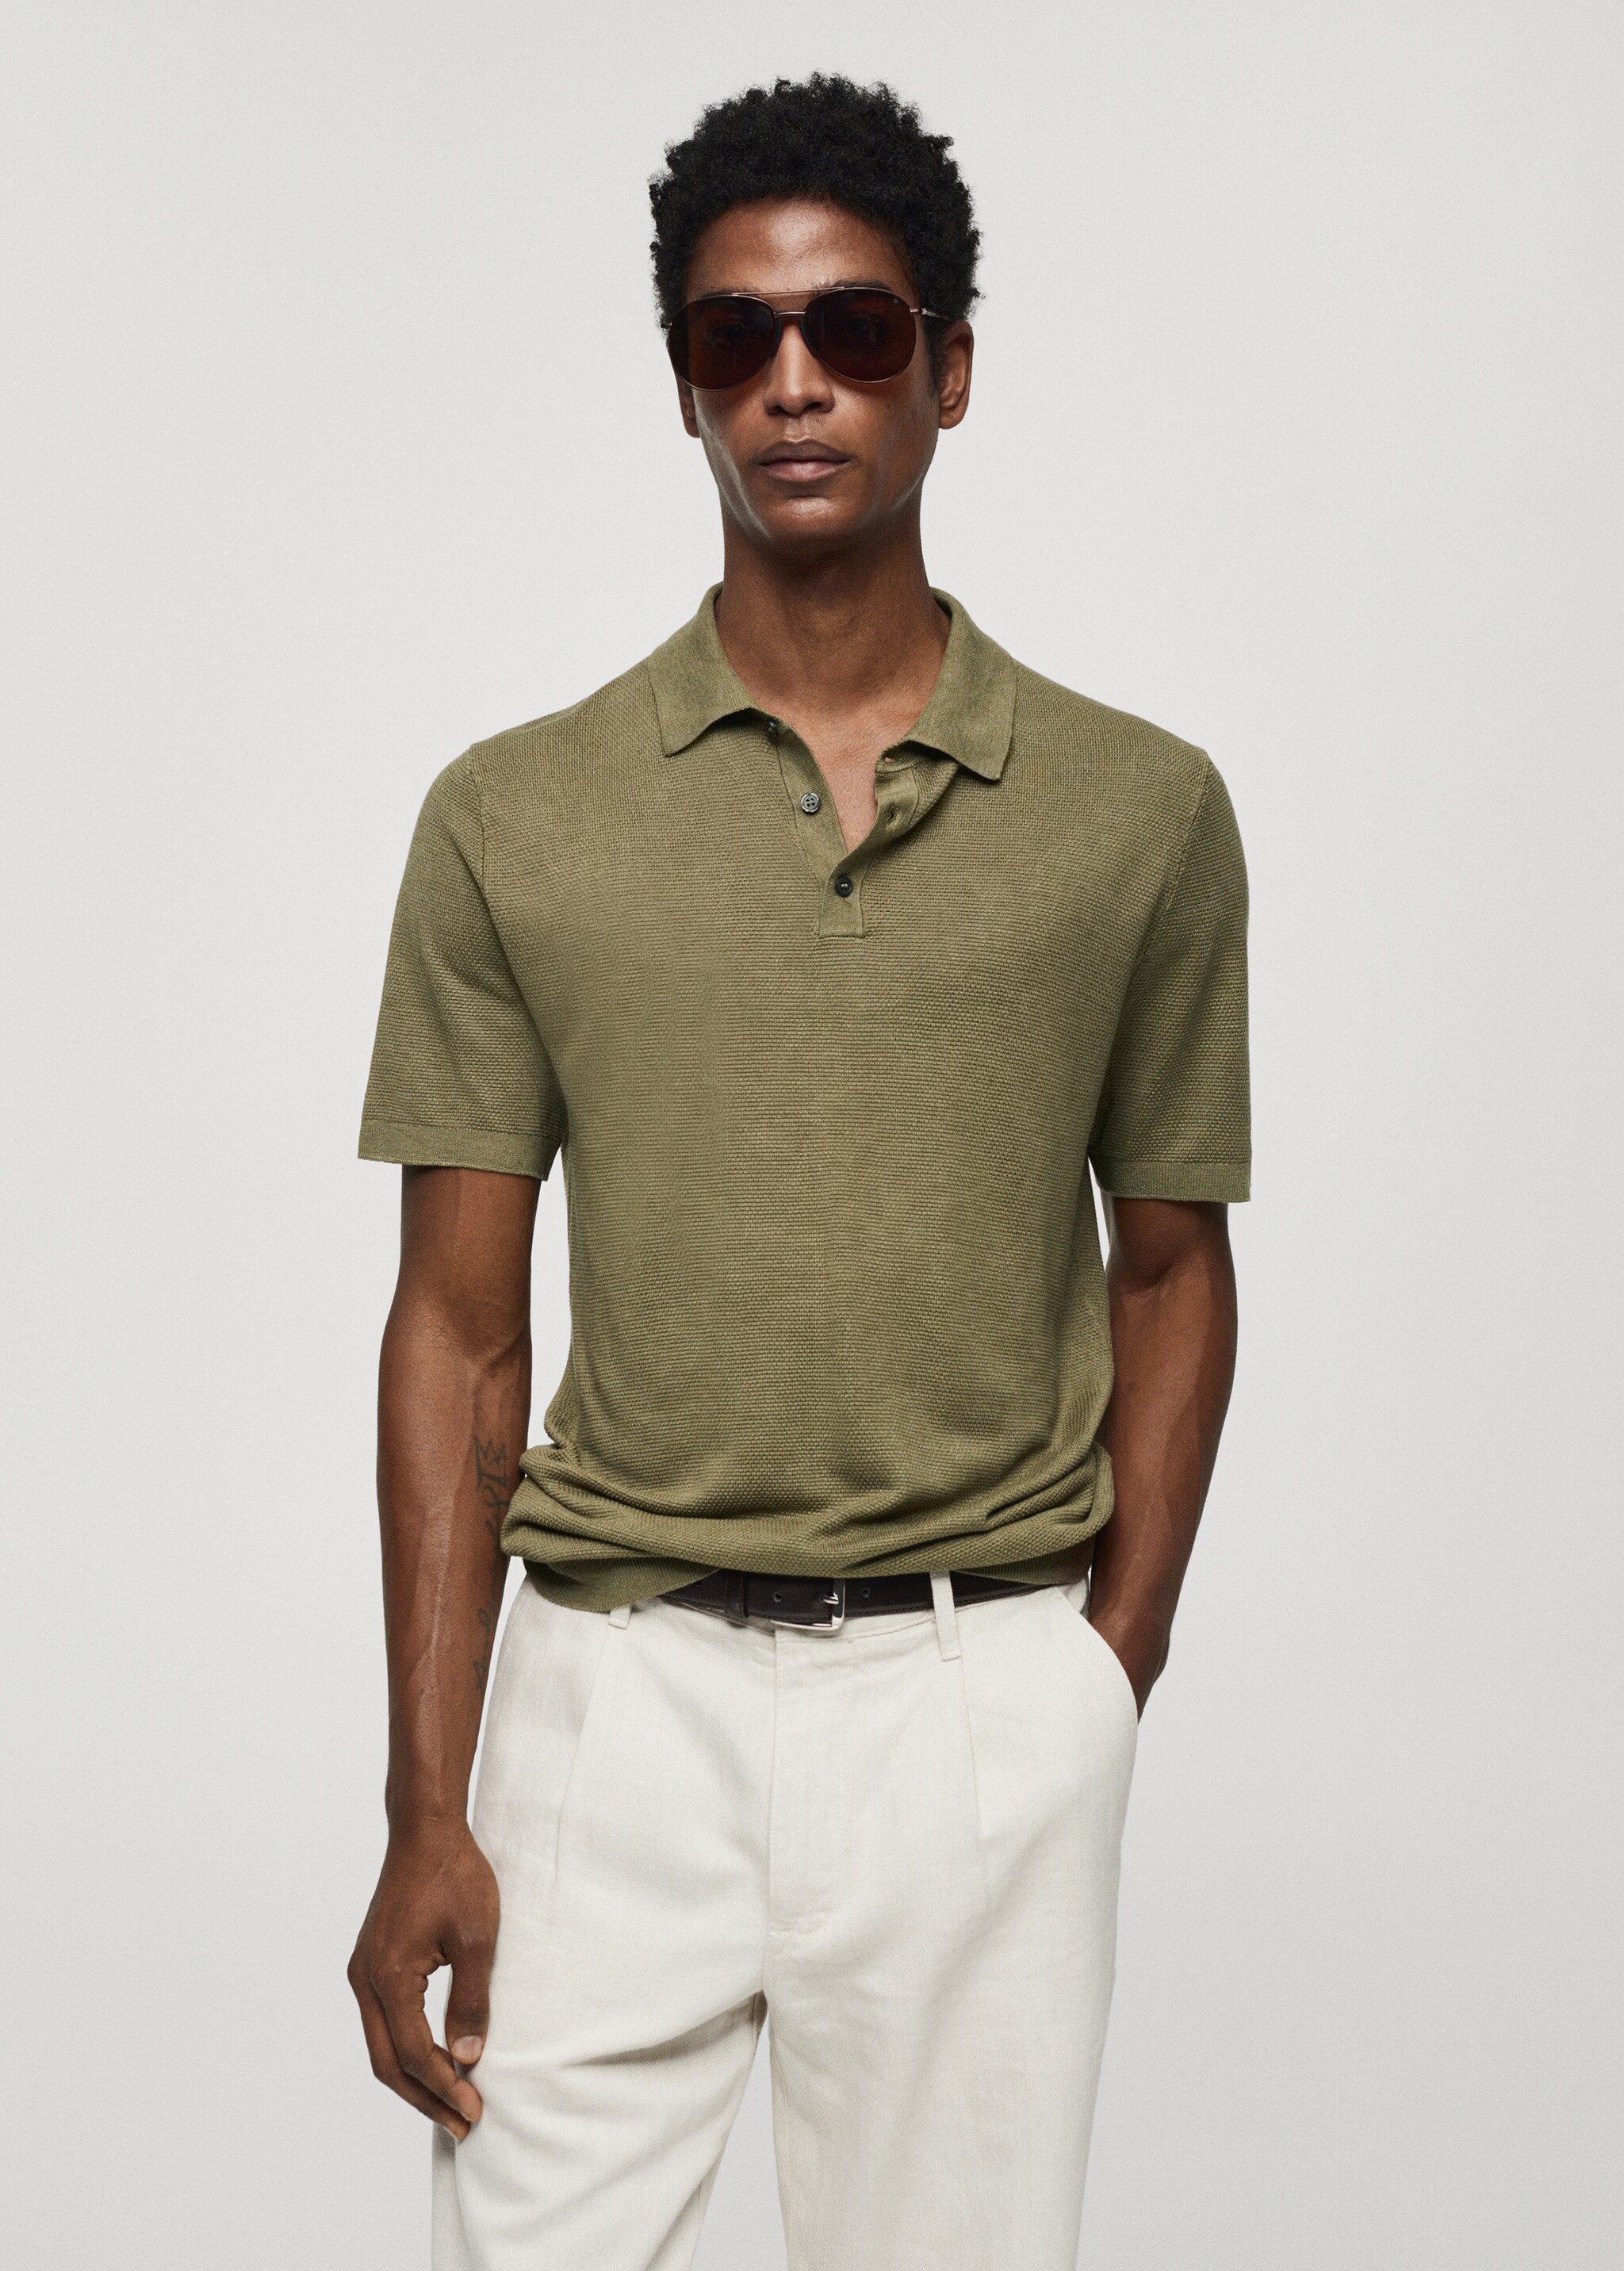 Buttoned micro-structure knitted polo shirt - Medium plane